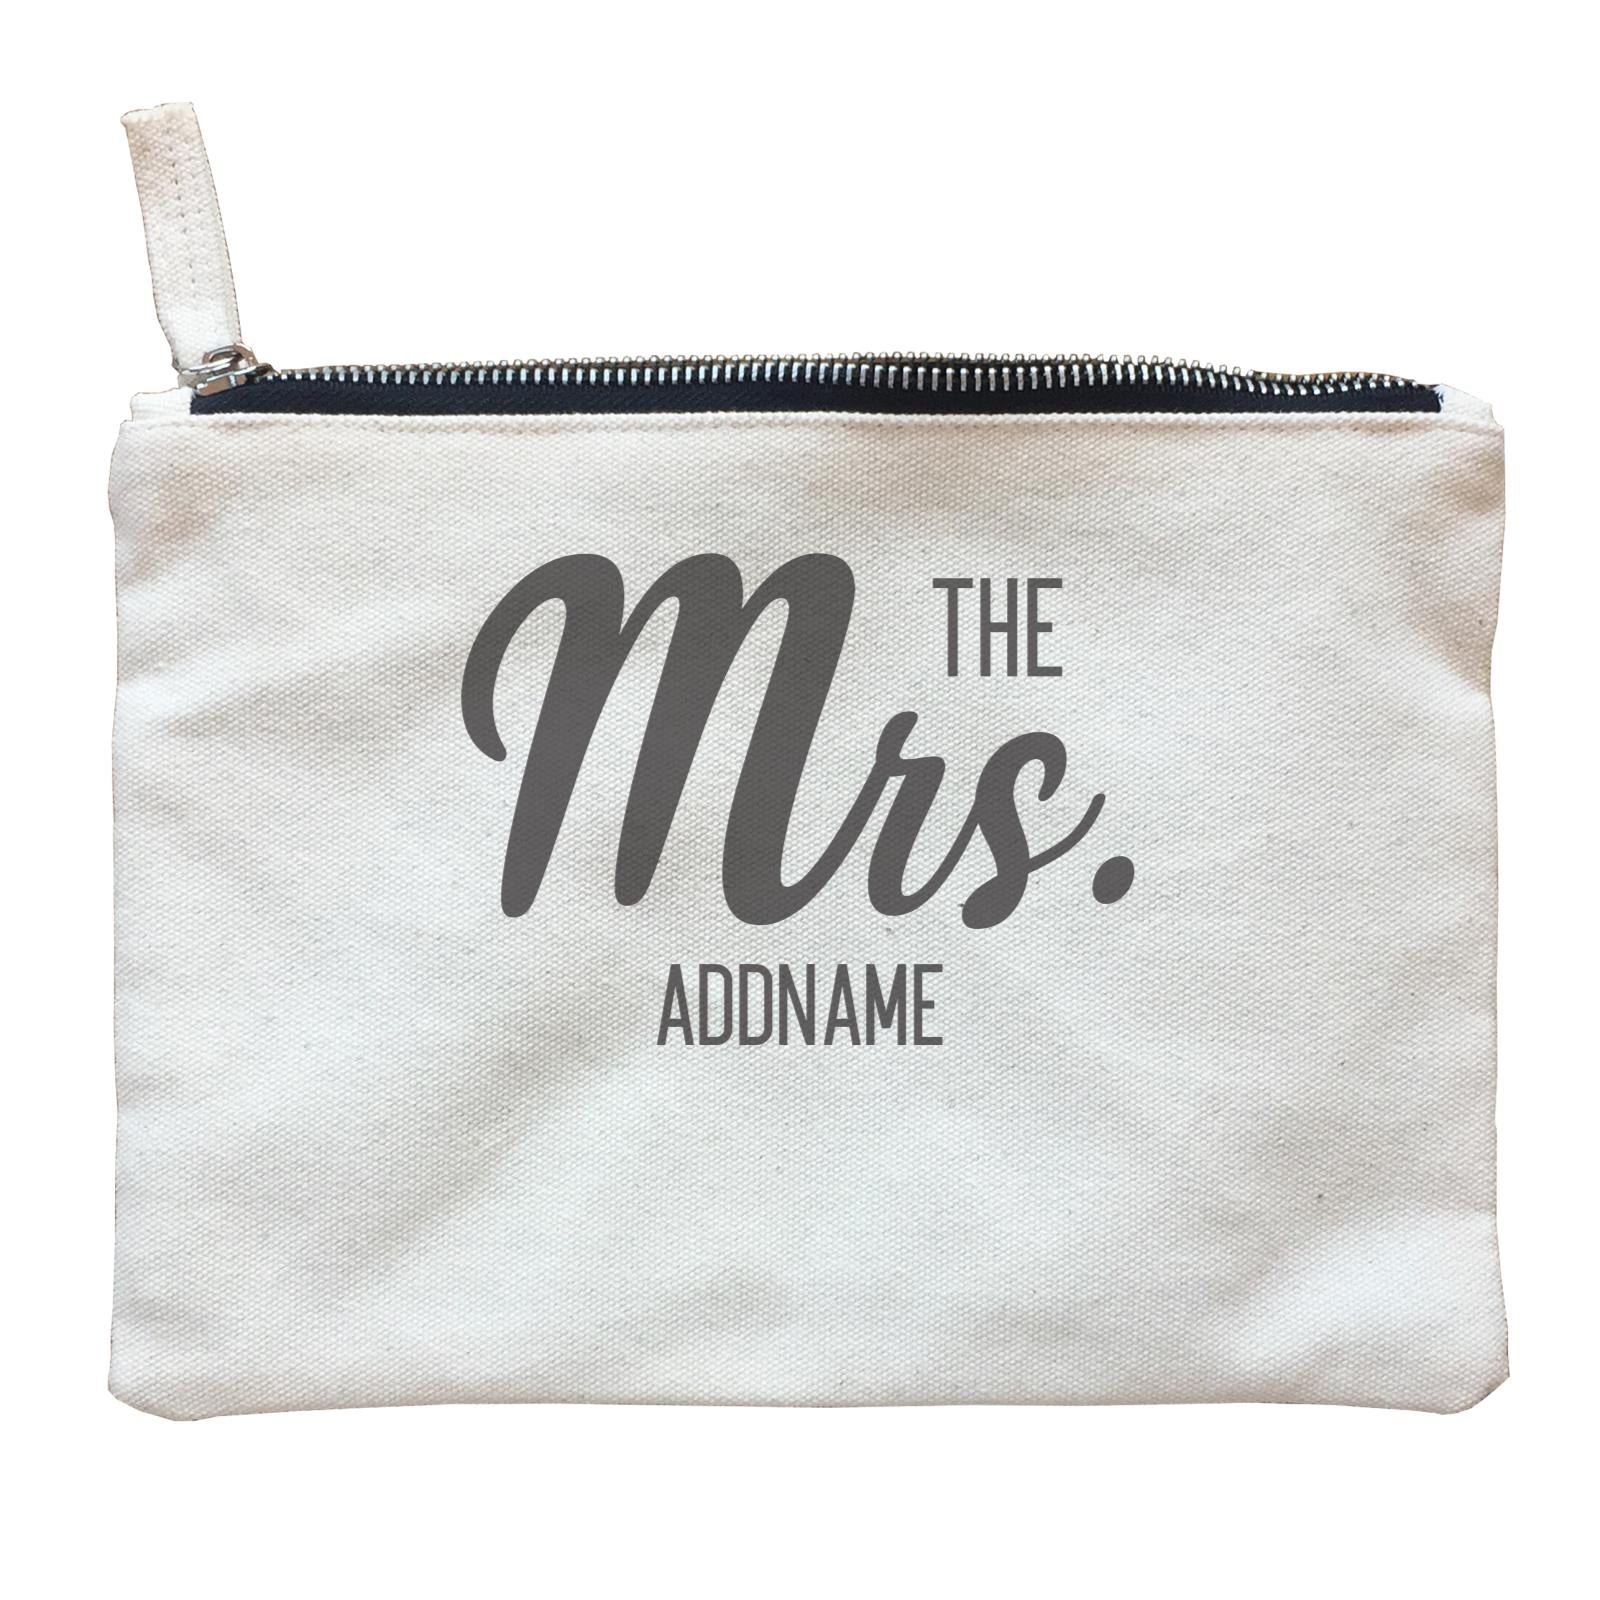 Husband and Wife The Mrs. Addname Zipper Pouch